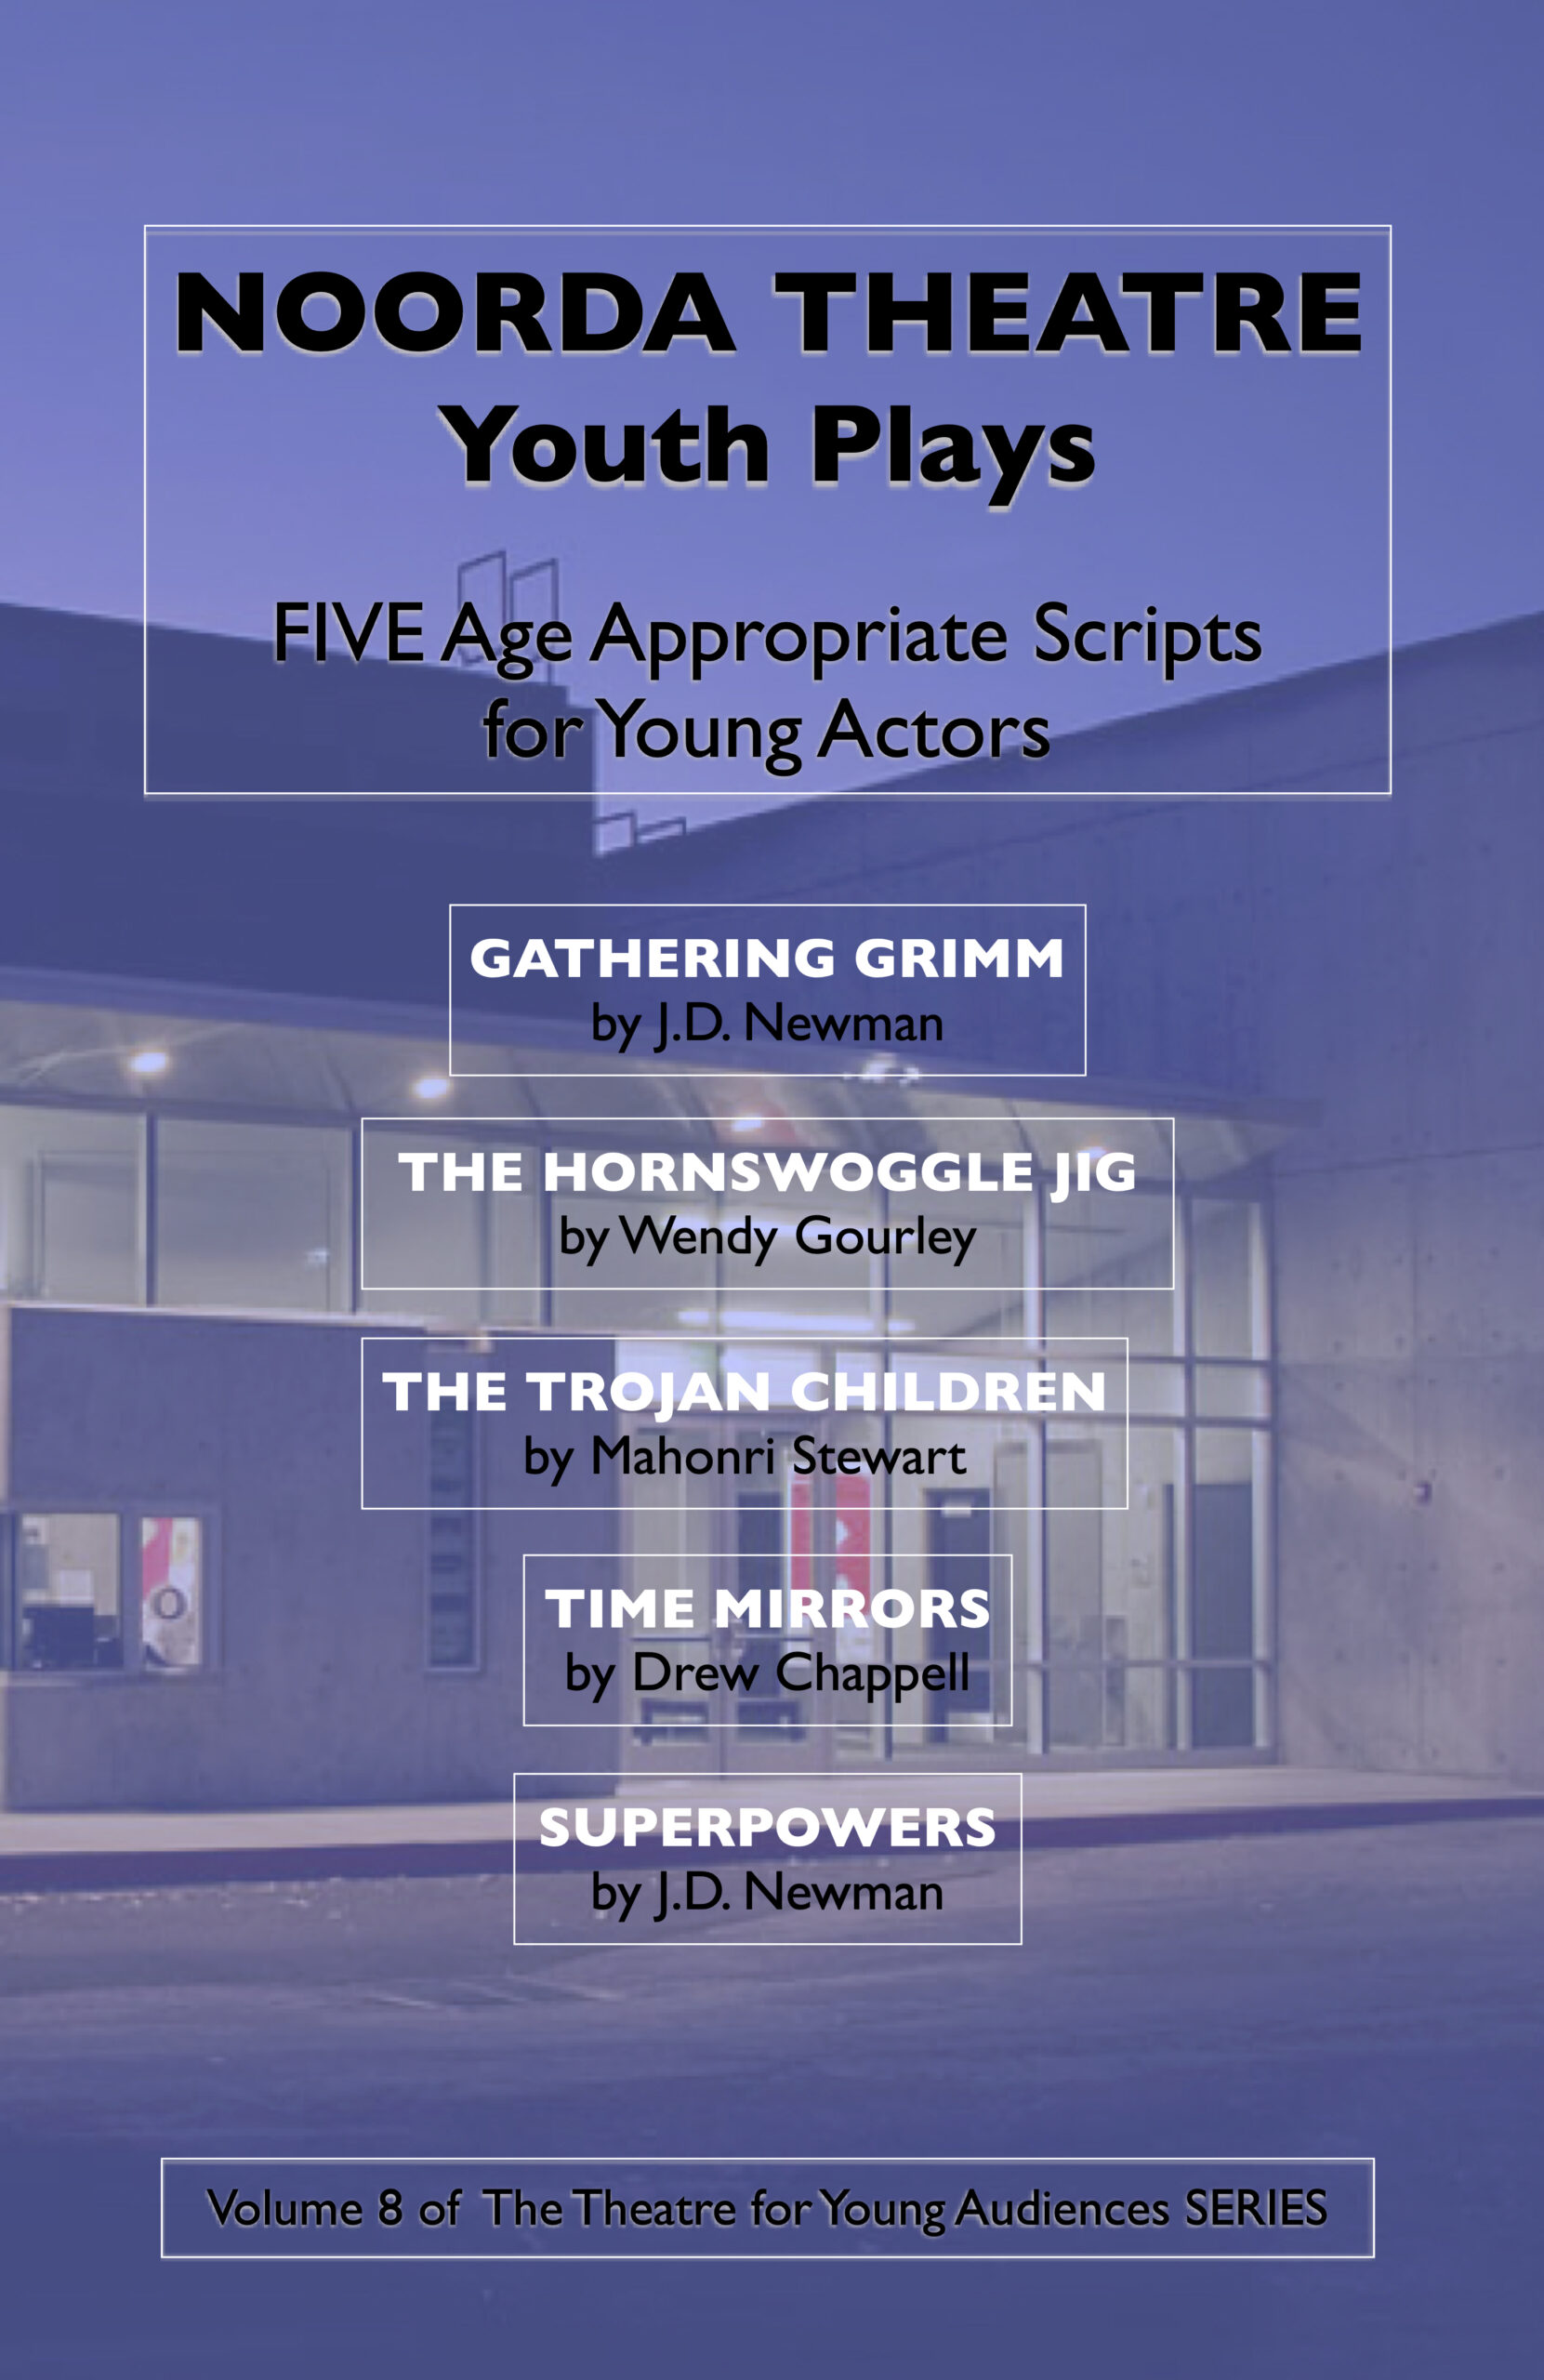 Noorda Theatre Youth Plays • Five Age Appropriate Scripts for Young Actors